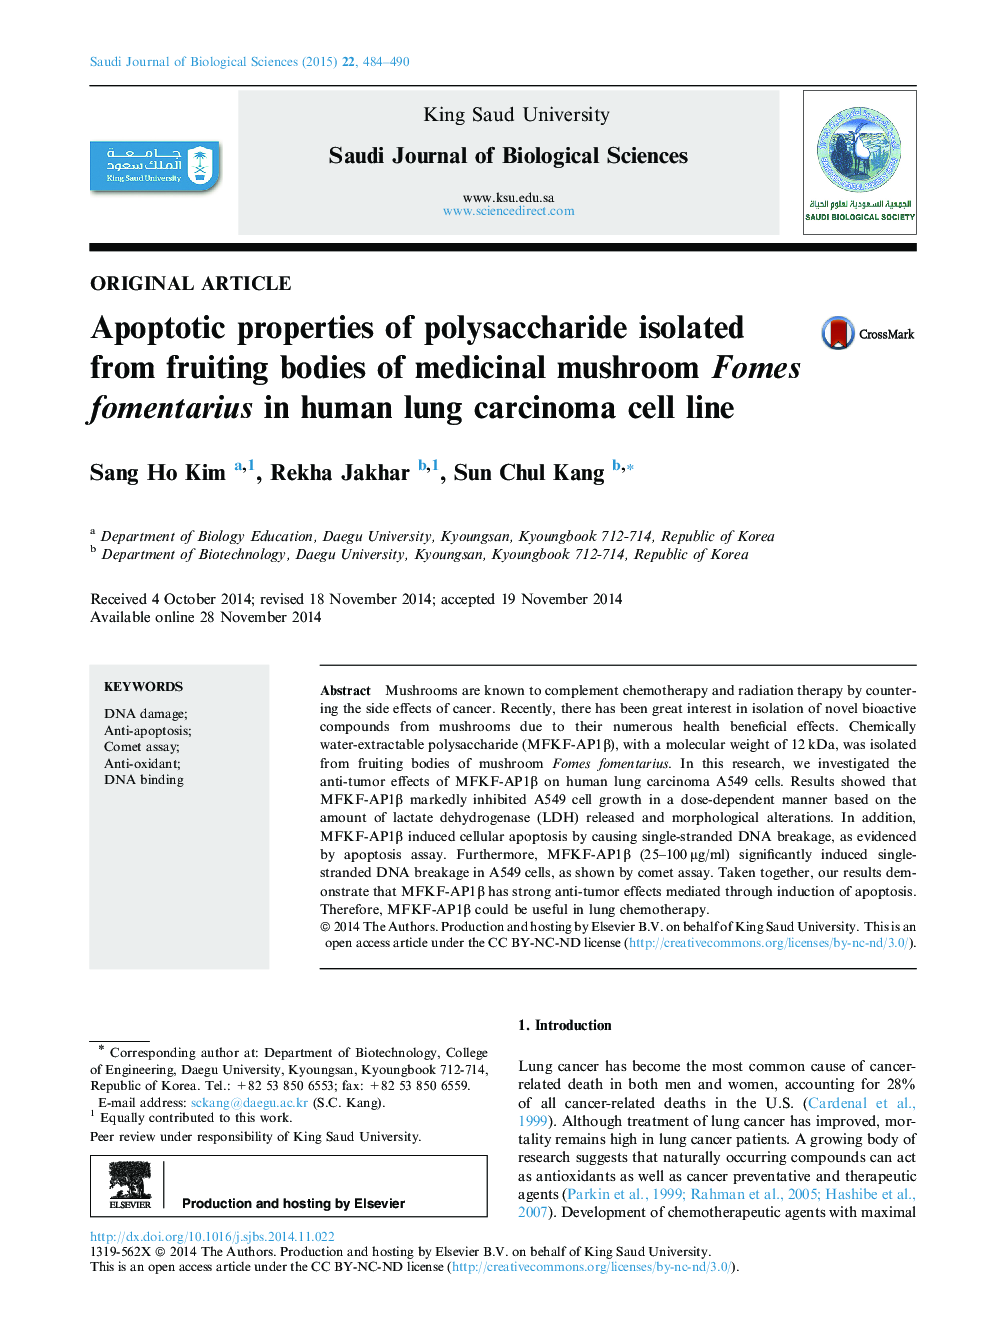 Apoptotic properties of polysaccharide isolated from fruiting bodies of medicinal mushroom Fomes fomentarius in human lung carcinoma cell line 